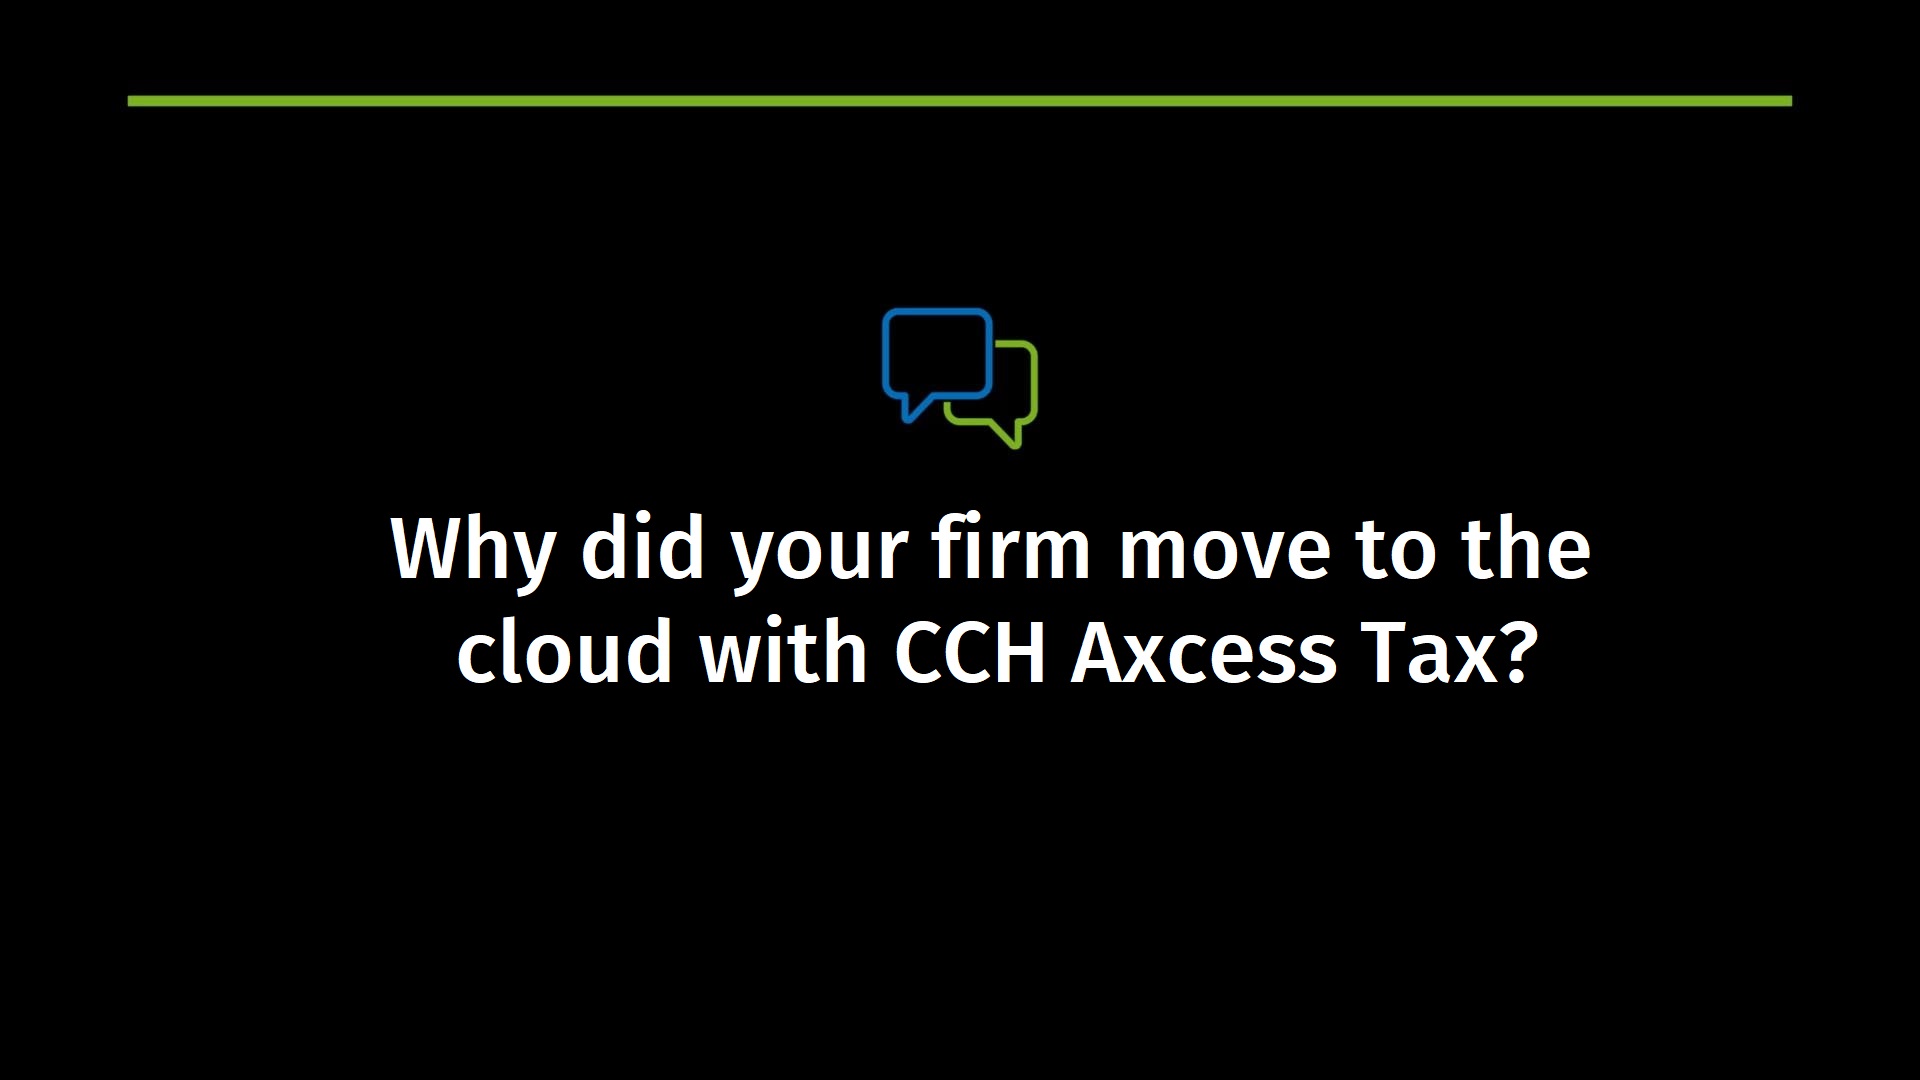 Why did your firm move to the cloud?